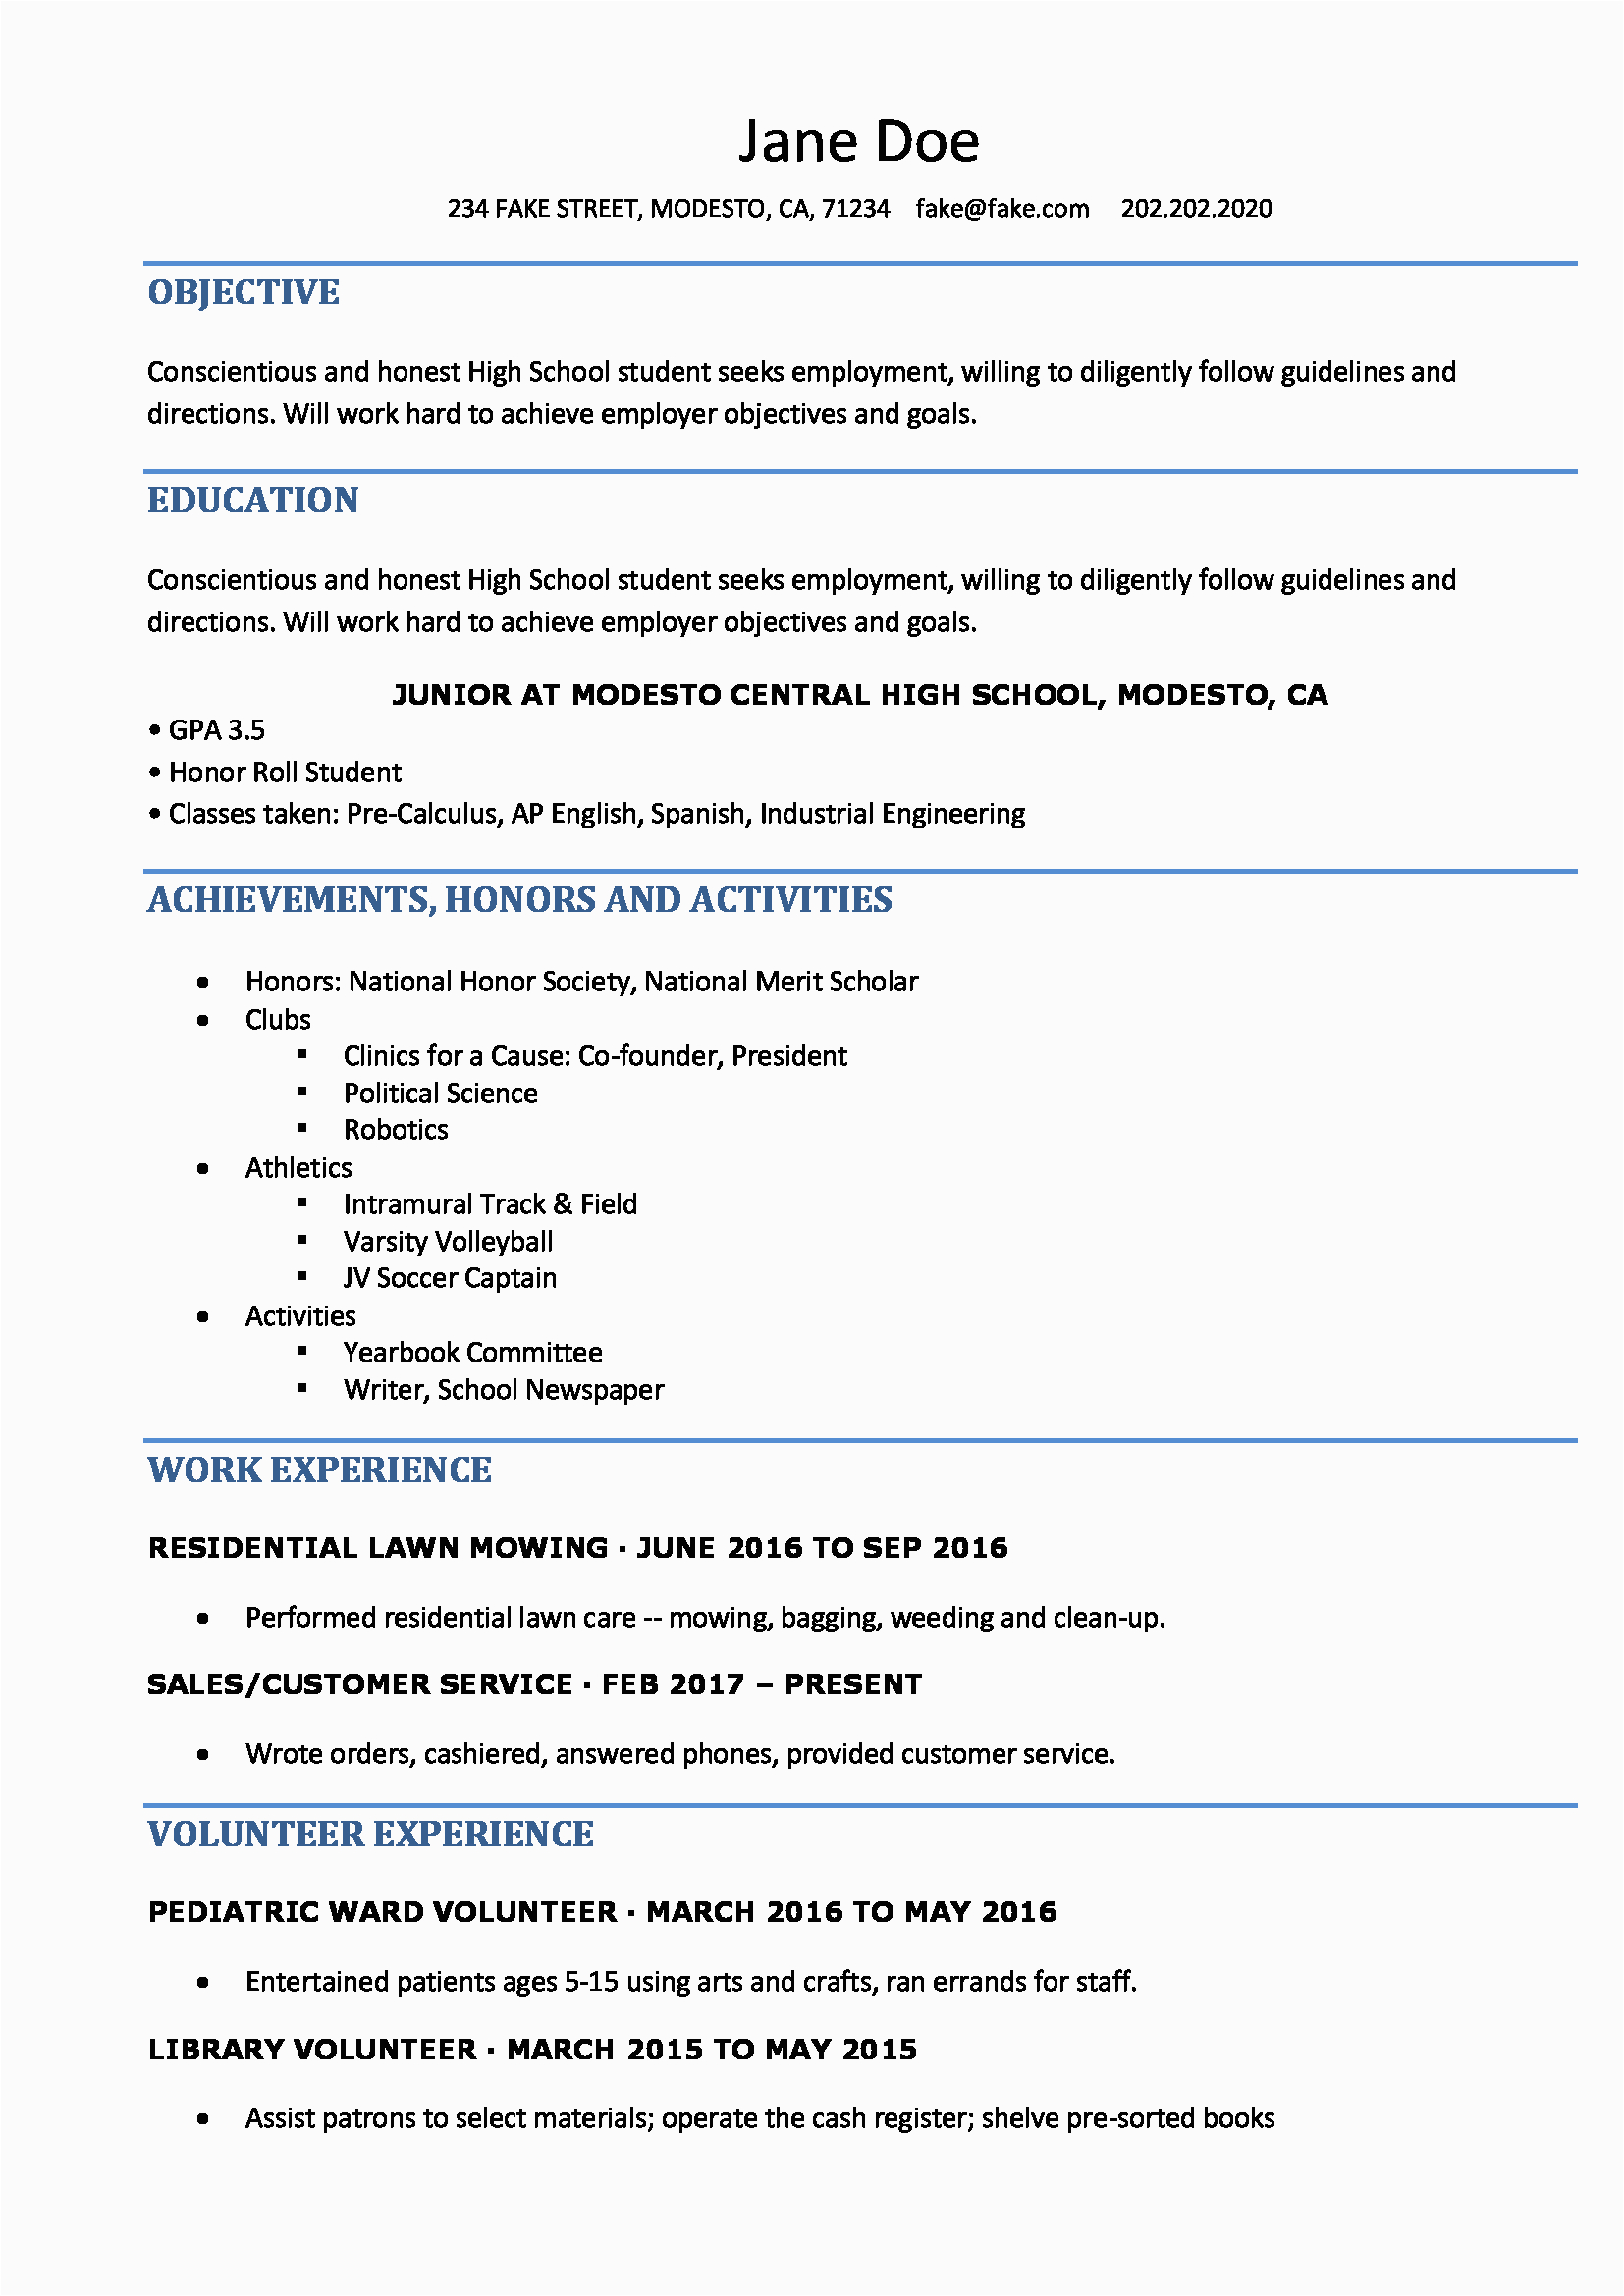 Free Printable Resume Template for High School Students High School Resume Resumes Perfect for High School Students